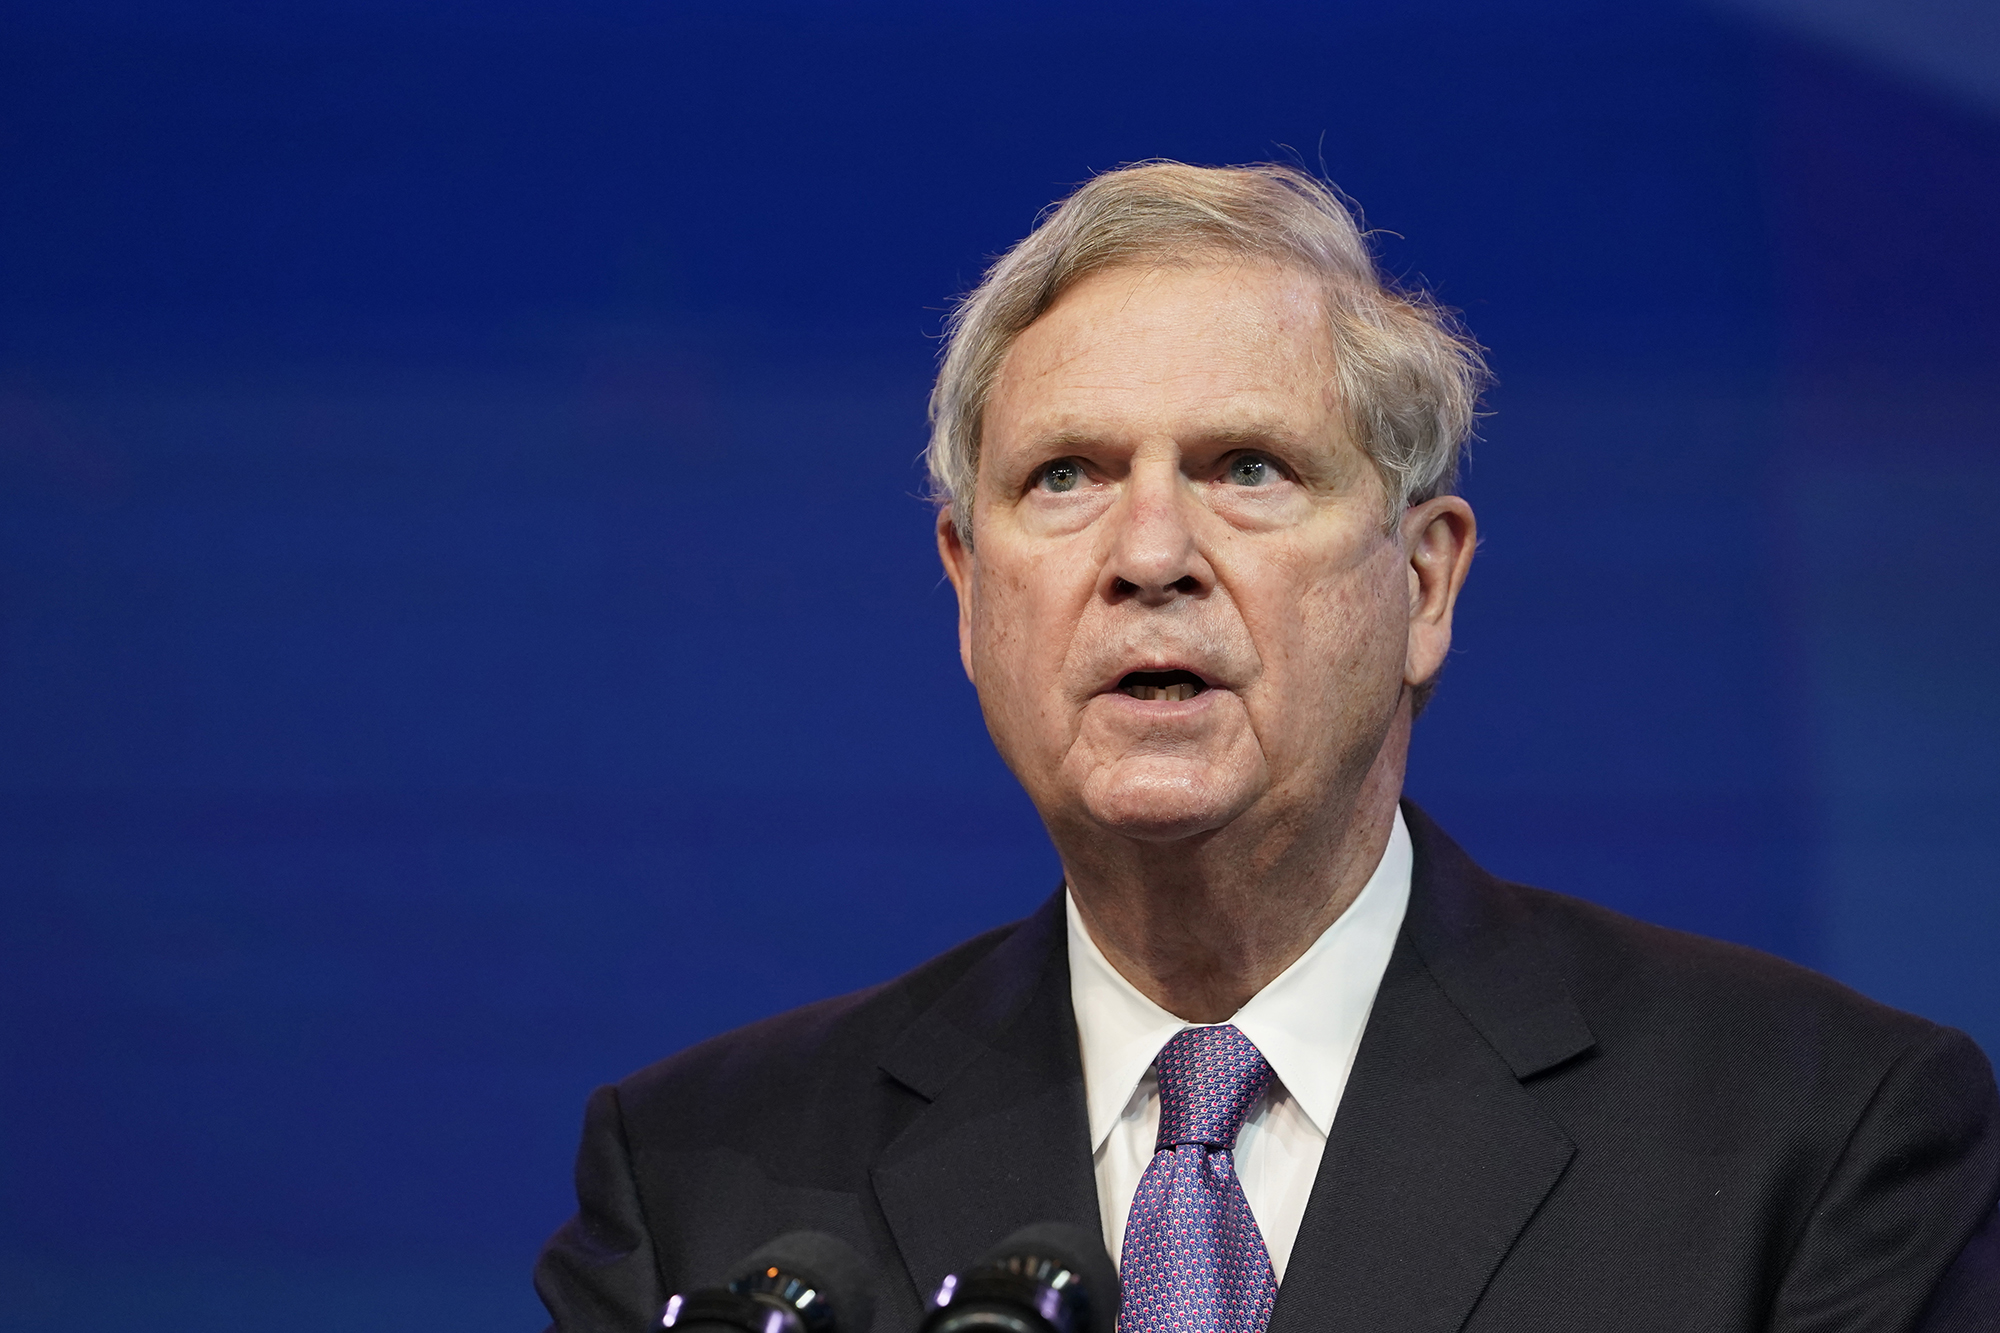 Wisconsin Farm Groups Applaud Tom Vilsack’s Nomination As U.S. Agriculture Secretary